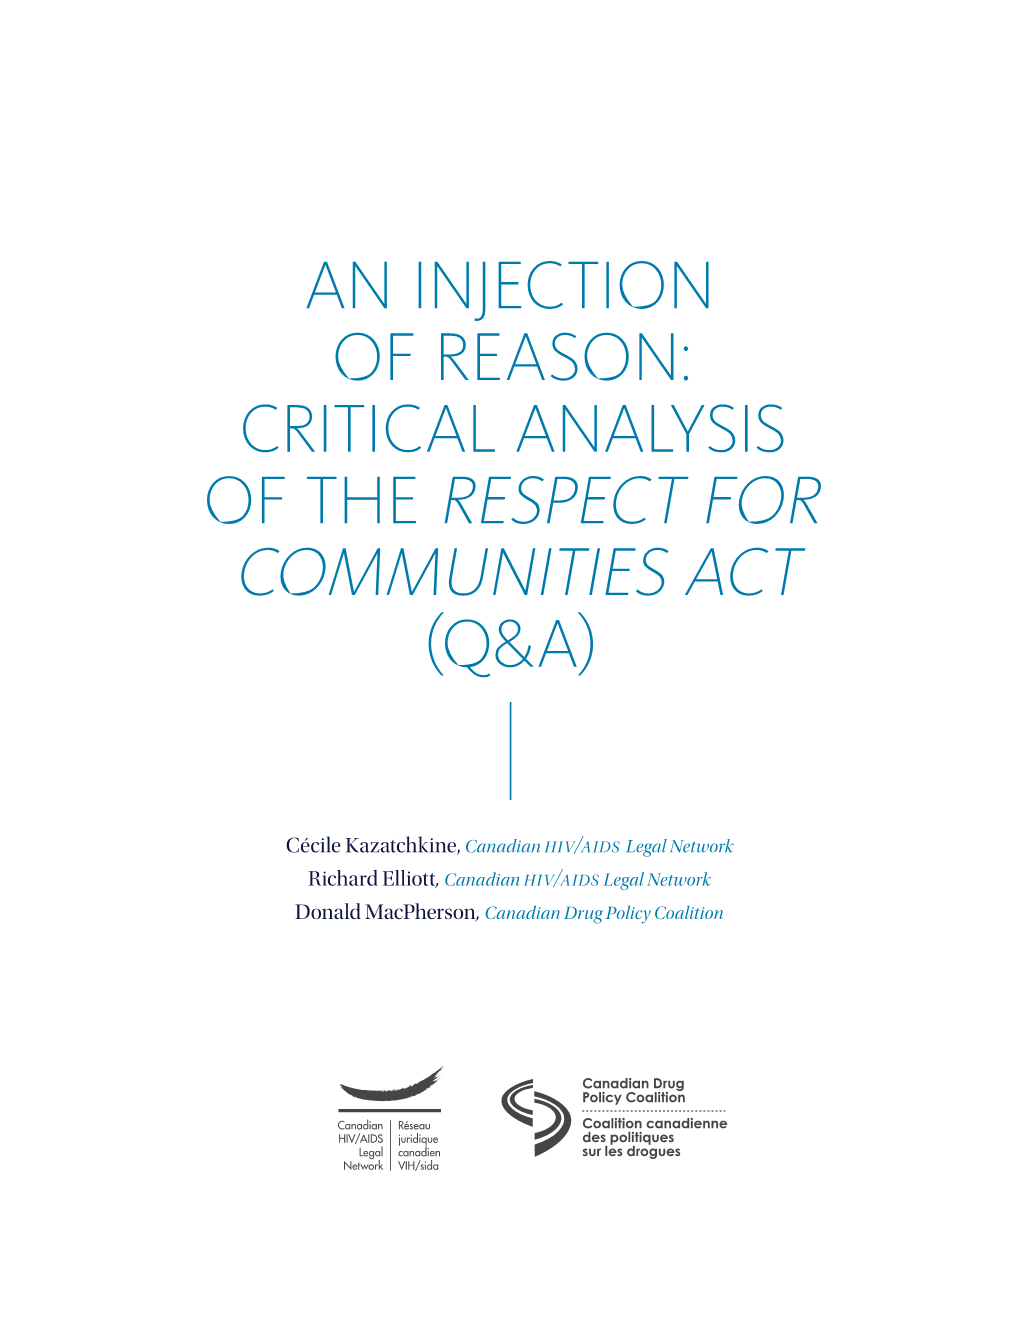 An Injection of Reason: Critical Analysis of the Respect for Communities Act (Q&A)